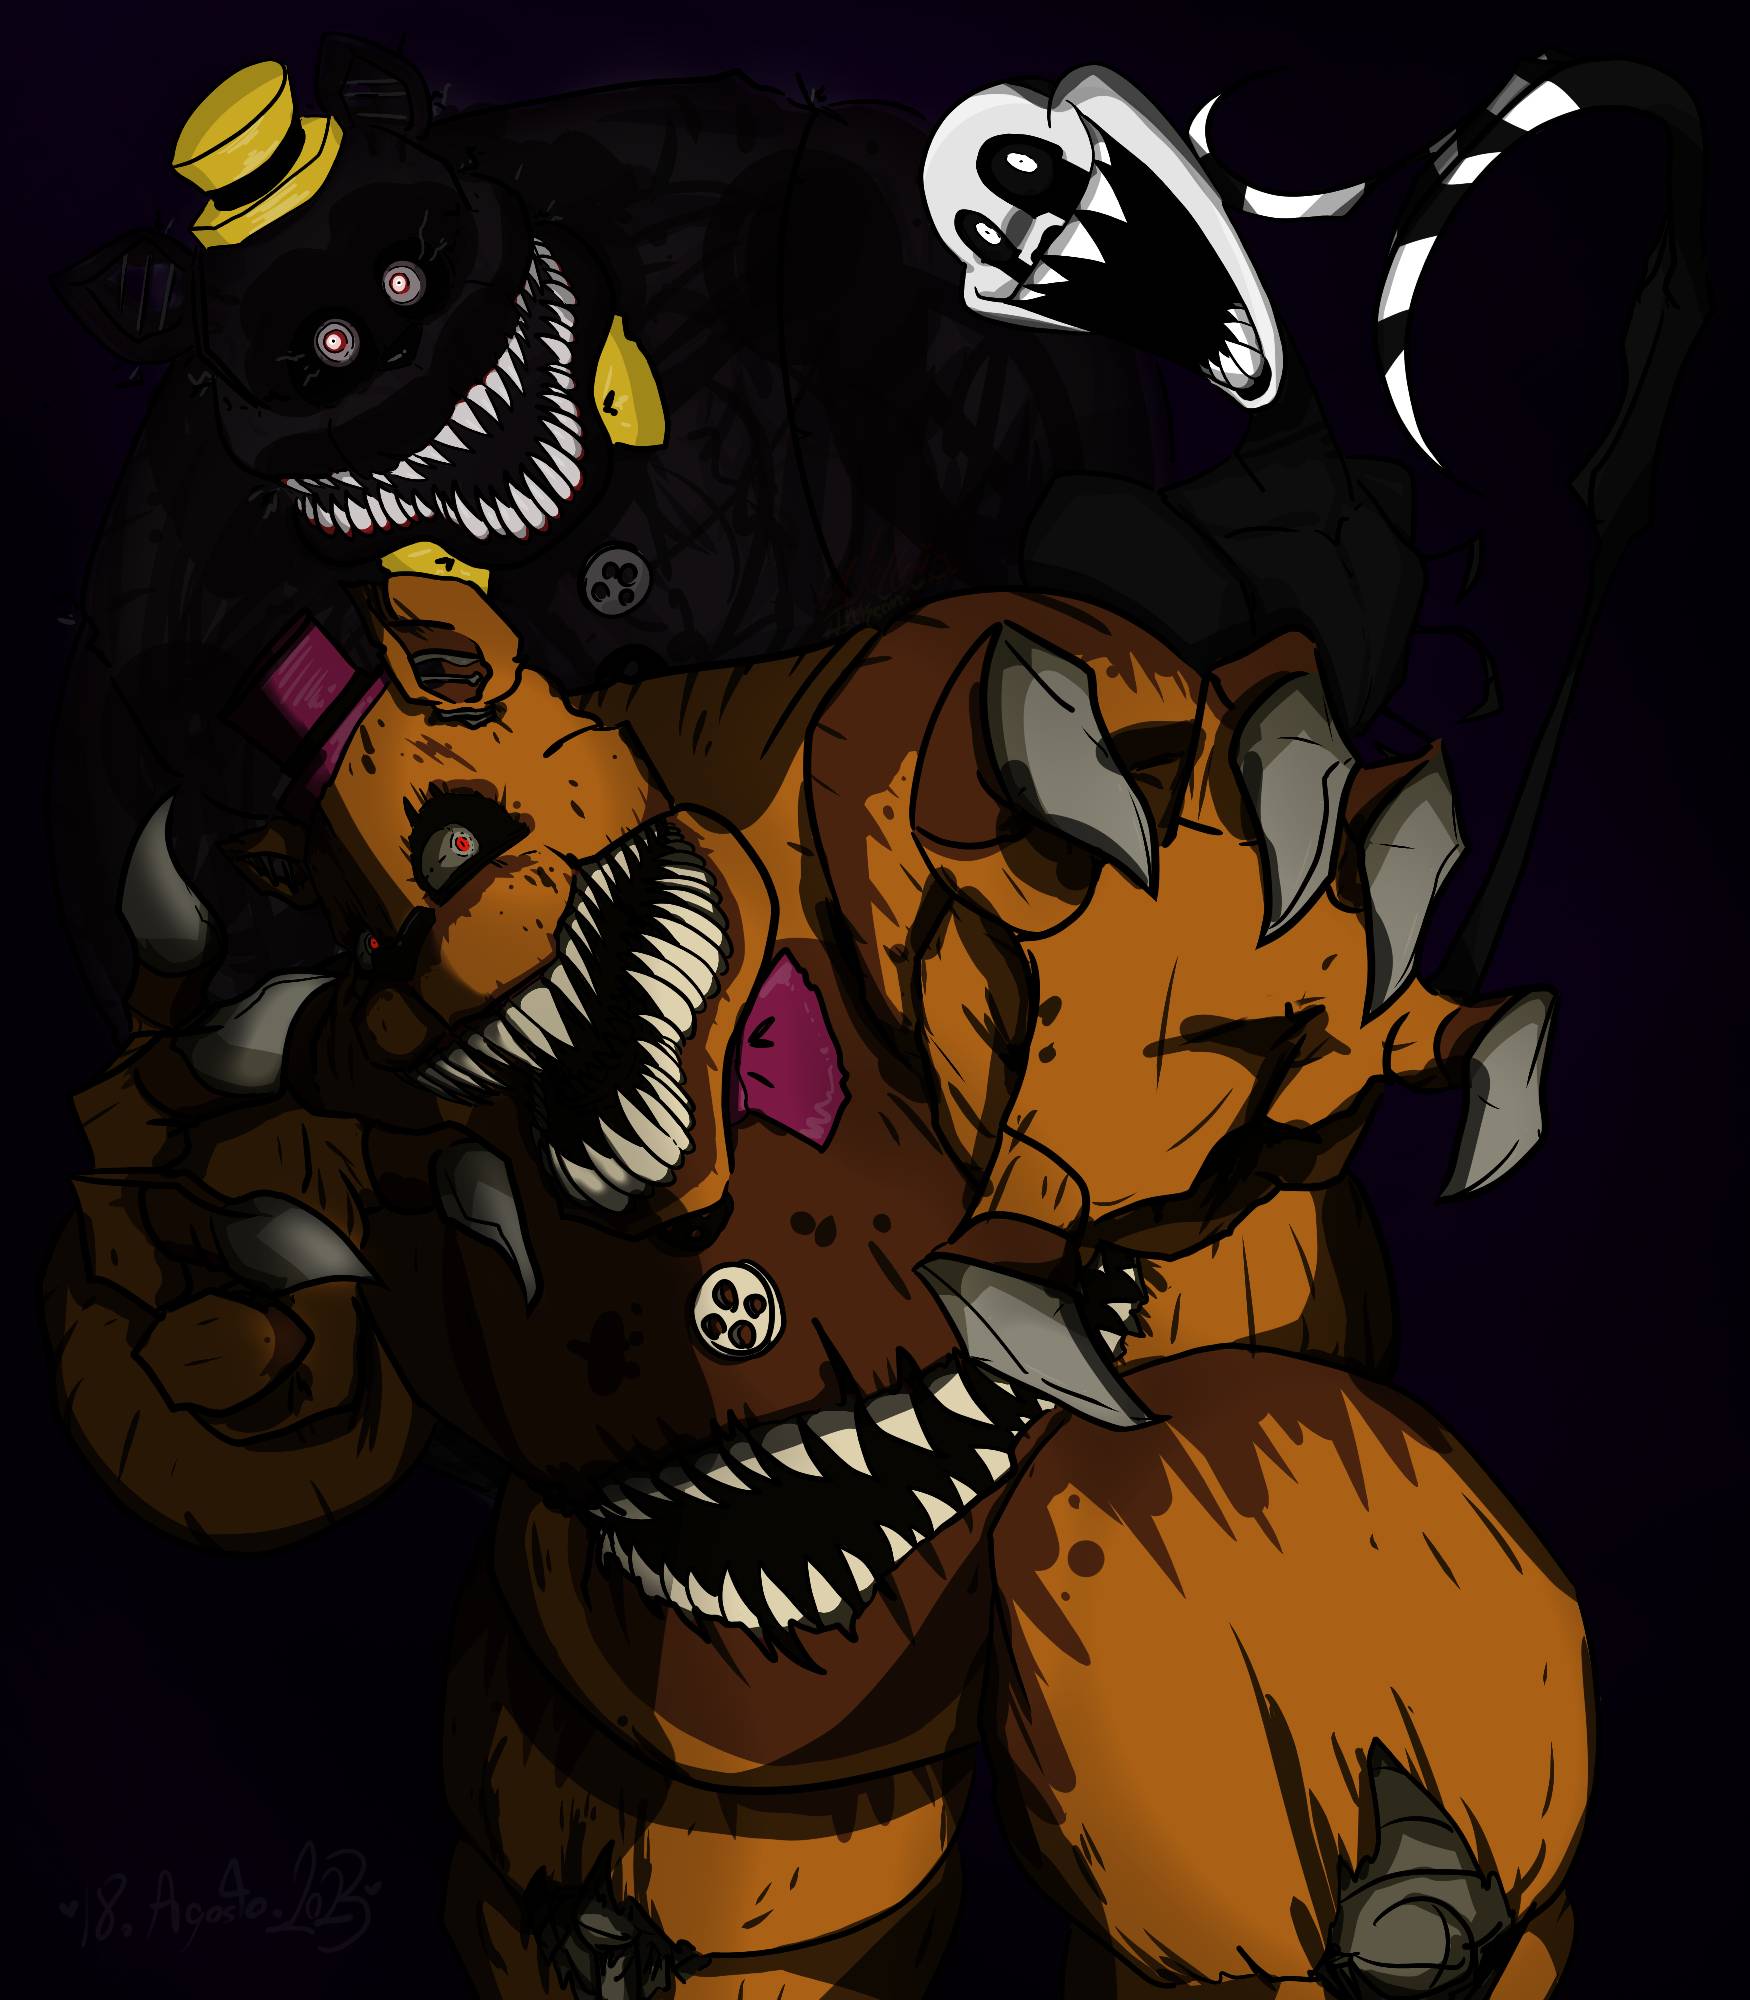 This is my fan-art drawing of Nightmare Fredbear from Five Nights at  Freddy's 4! Summer always makes me super nostalgic for FNaF4, especially  the hype leading up to it's release : r/fivenightsatfreddys